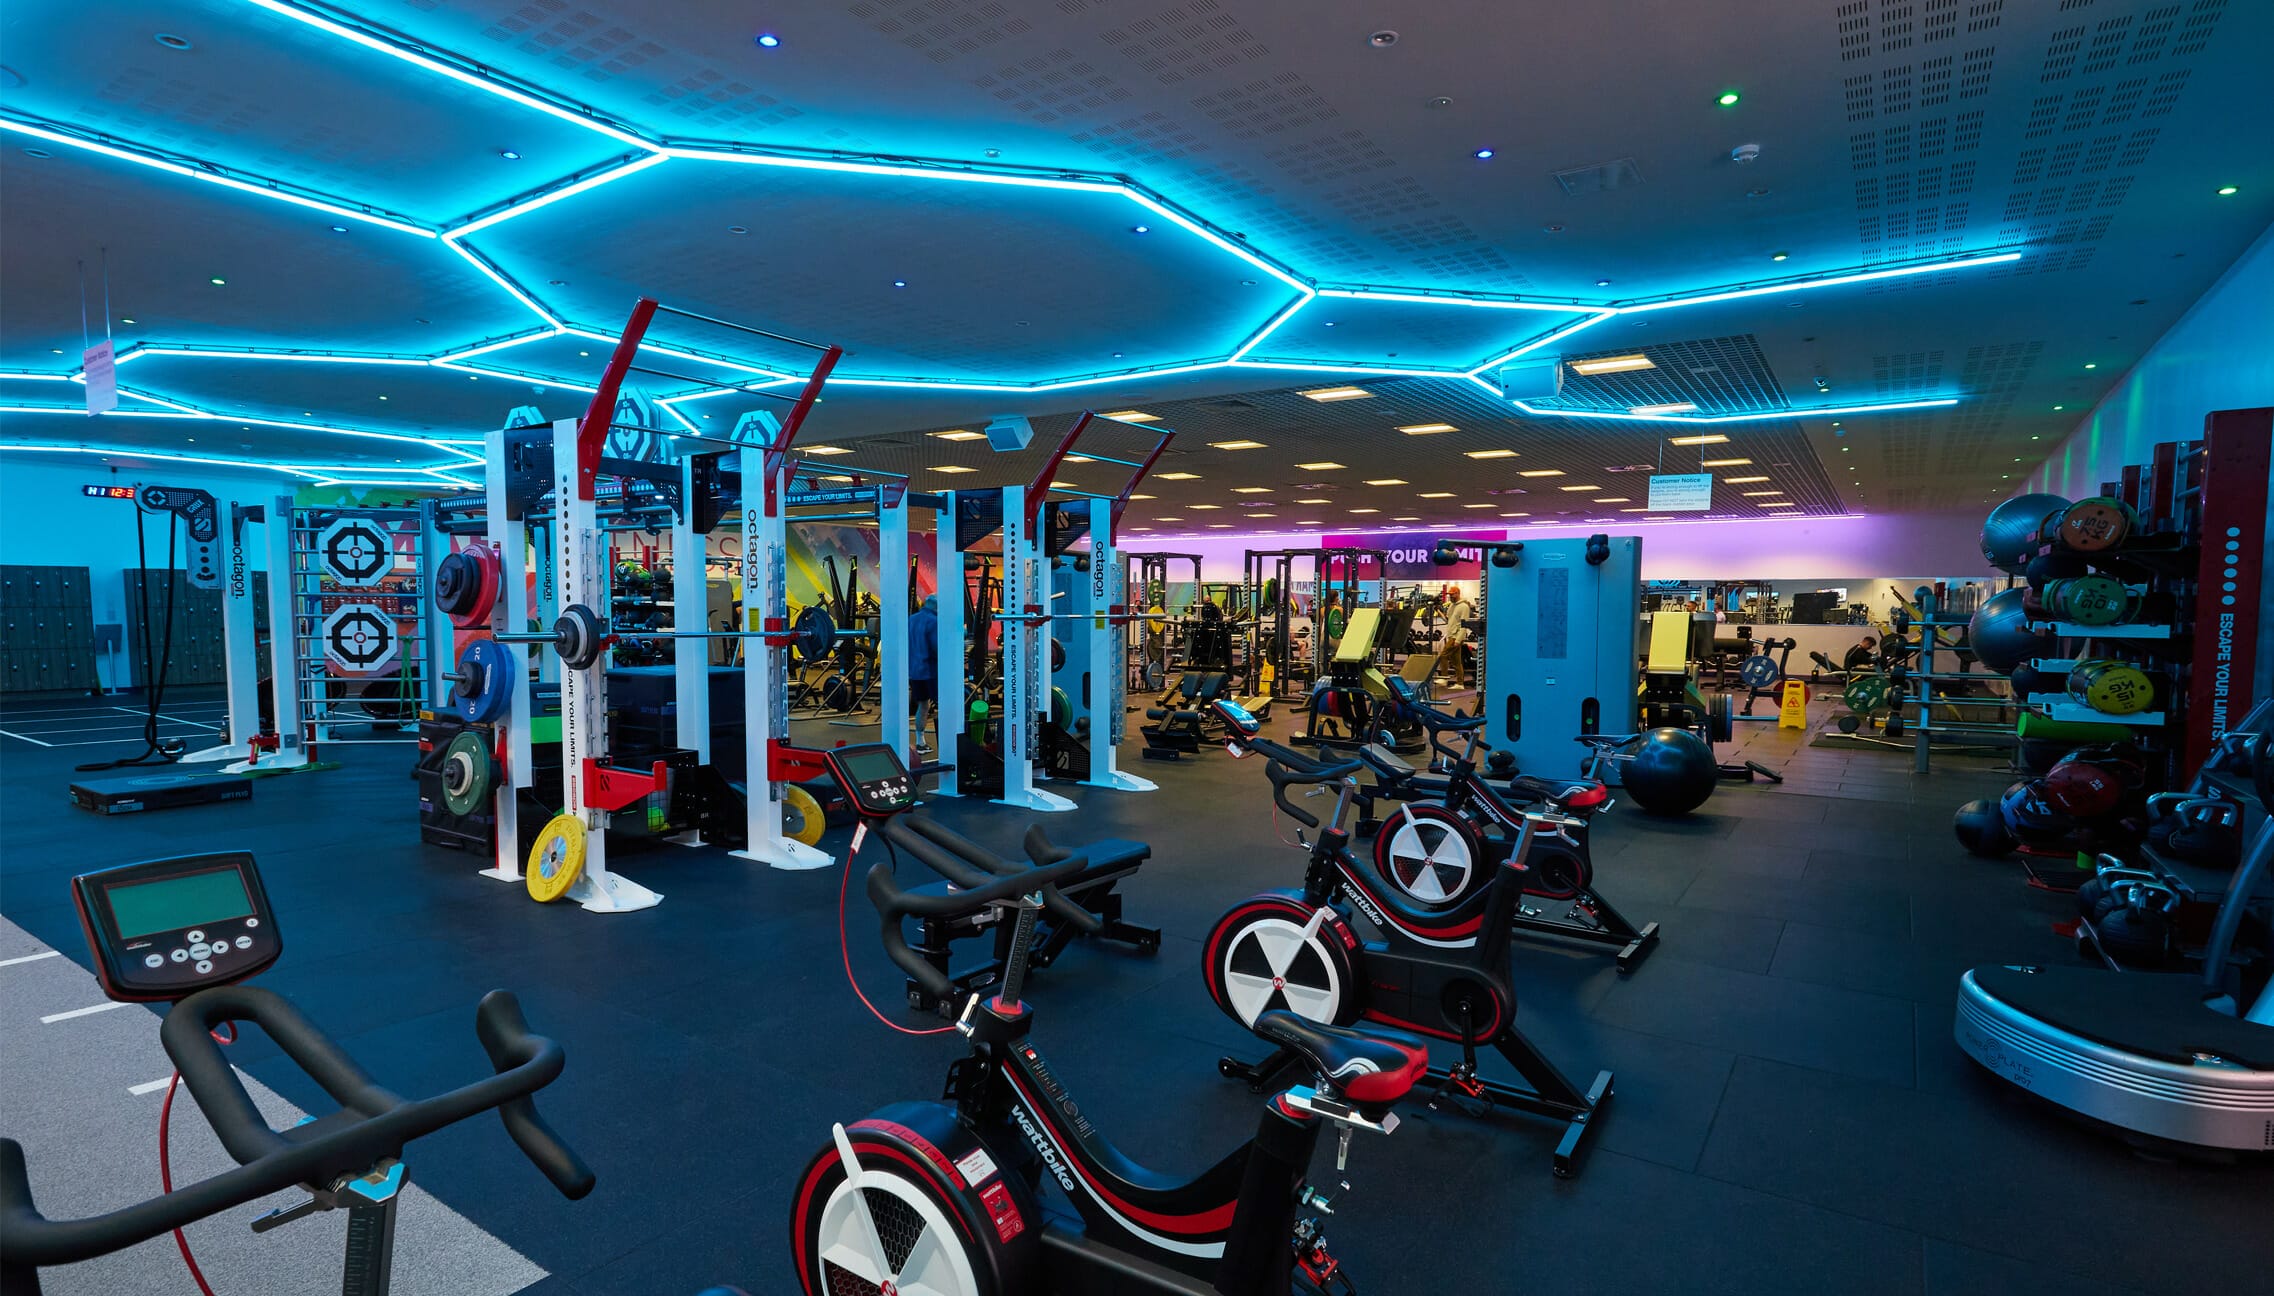 Introducing Junior Studio Cycling and Family Gym